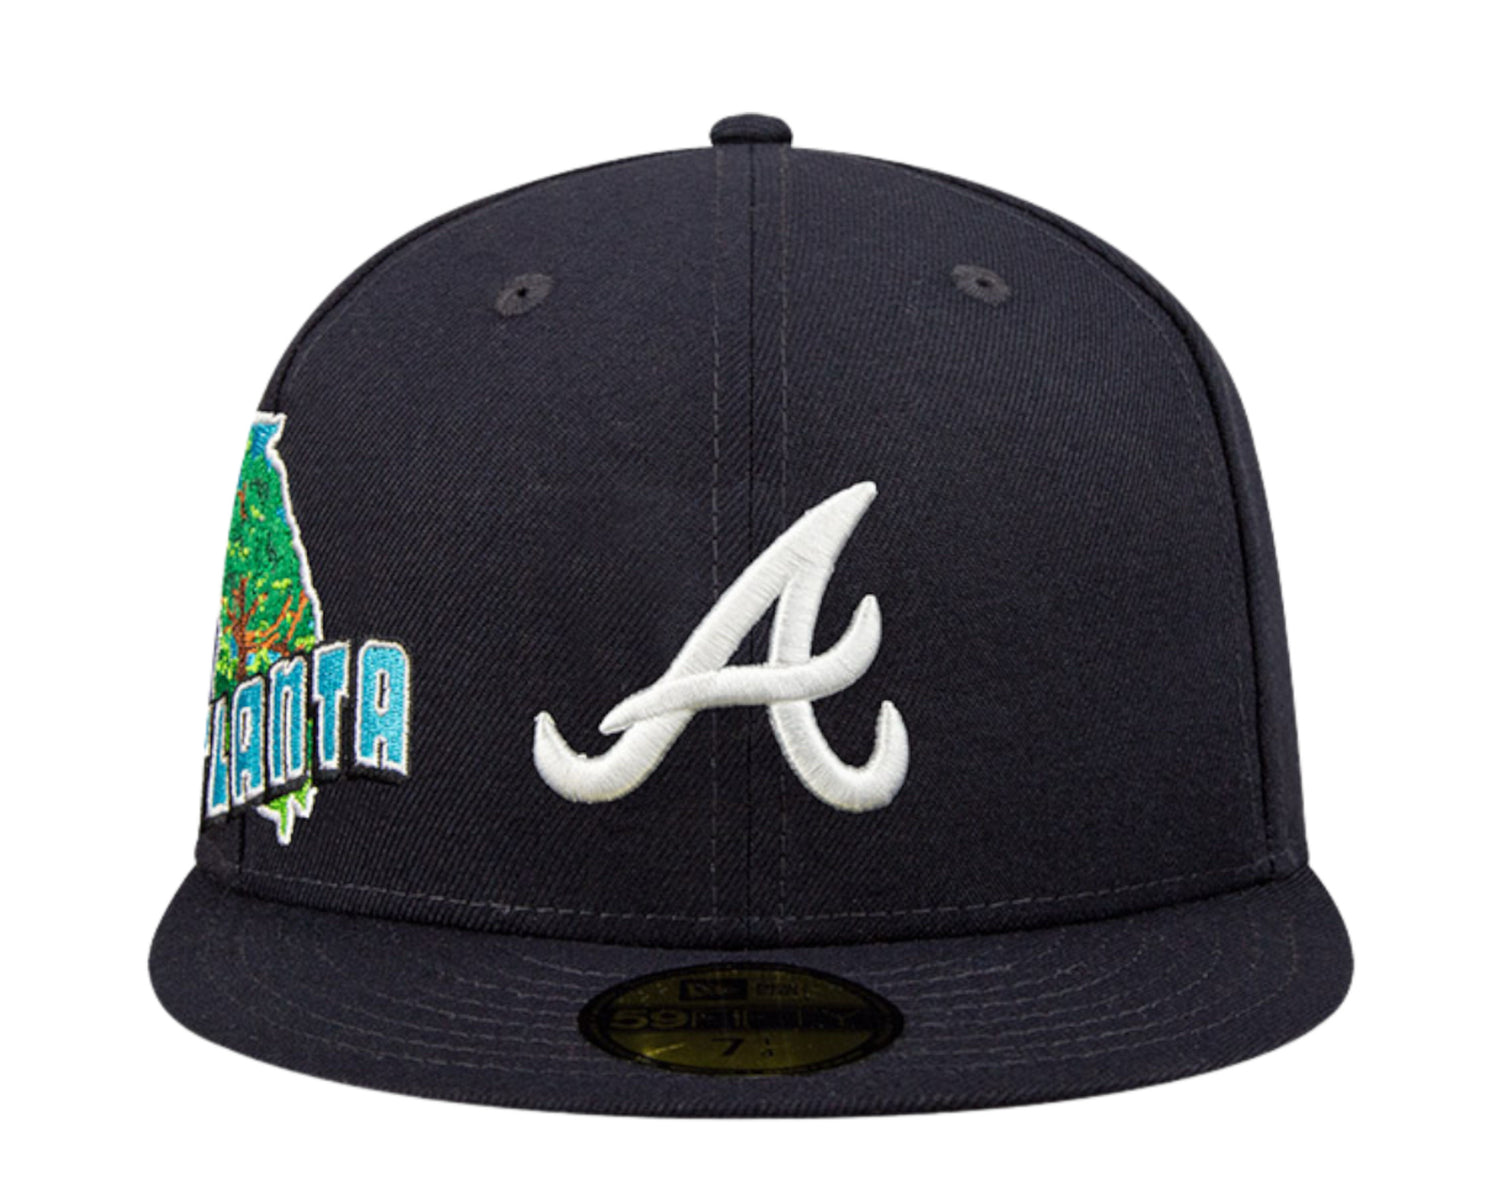 New Era 59Fifty MLB Atlanta Braves Stateview Fitted Hat